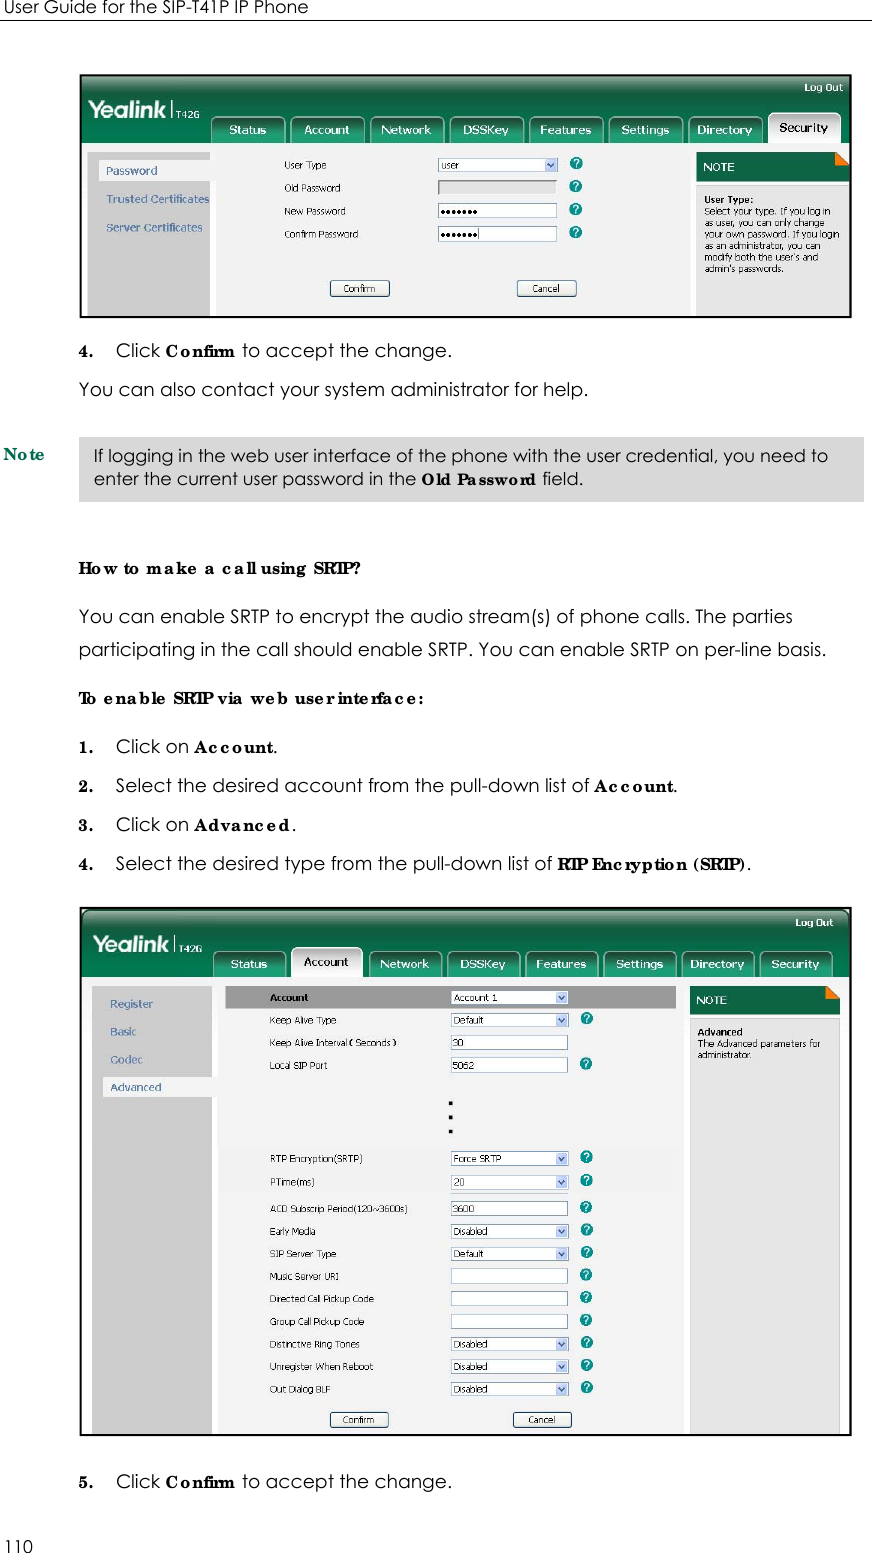 User Guide for the SIP-T41P IP Phone 110  4. Click Confirm to accept the change. You can also contact your system administrator for help. Note How to make a call using SRTP? You can enable SRTP to encrypt the audio stream(s) of phone calls. The parties participating in the call should enable SRTP. You can enable SRTP on per-line basis. To enable SRTP via web user interface: 1. Click on Account. 2. Select the desired account from the pull-down list of Account. 3. Click on Advanced. 4. Select the desired type from the pull-down list of RTP Encryption (SRTP).  5. Click Confirm to accept the change.   If logging in the web user interface of the phone with the user credential, you need to enter the current user password in the Old Password field. 